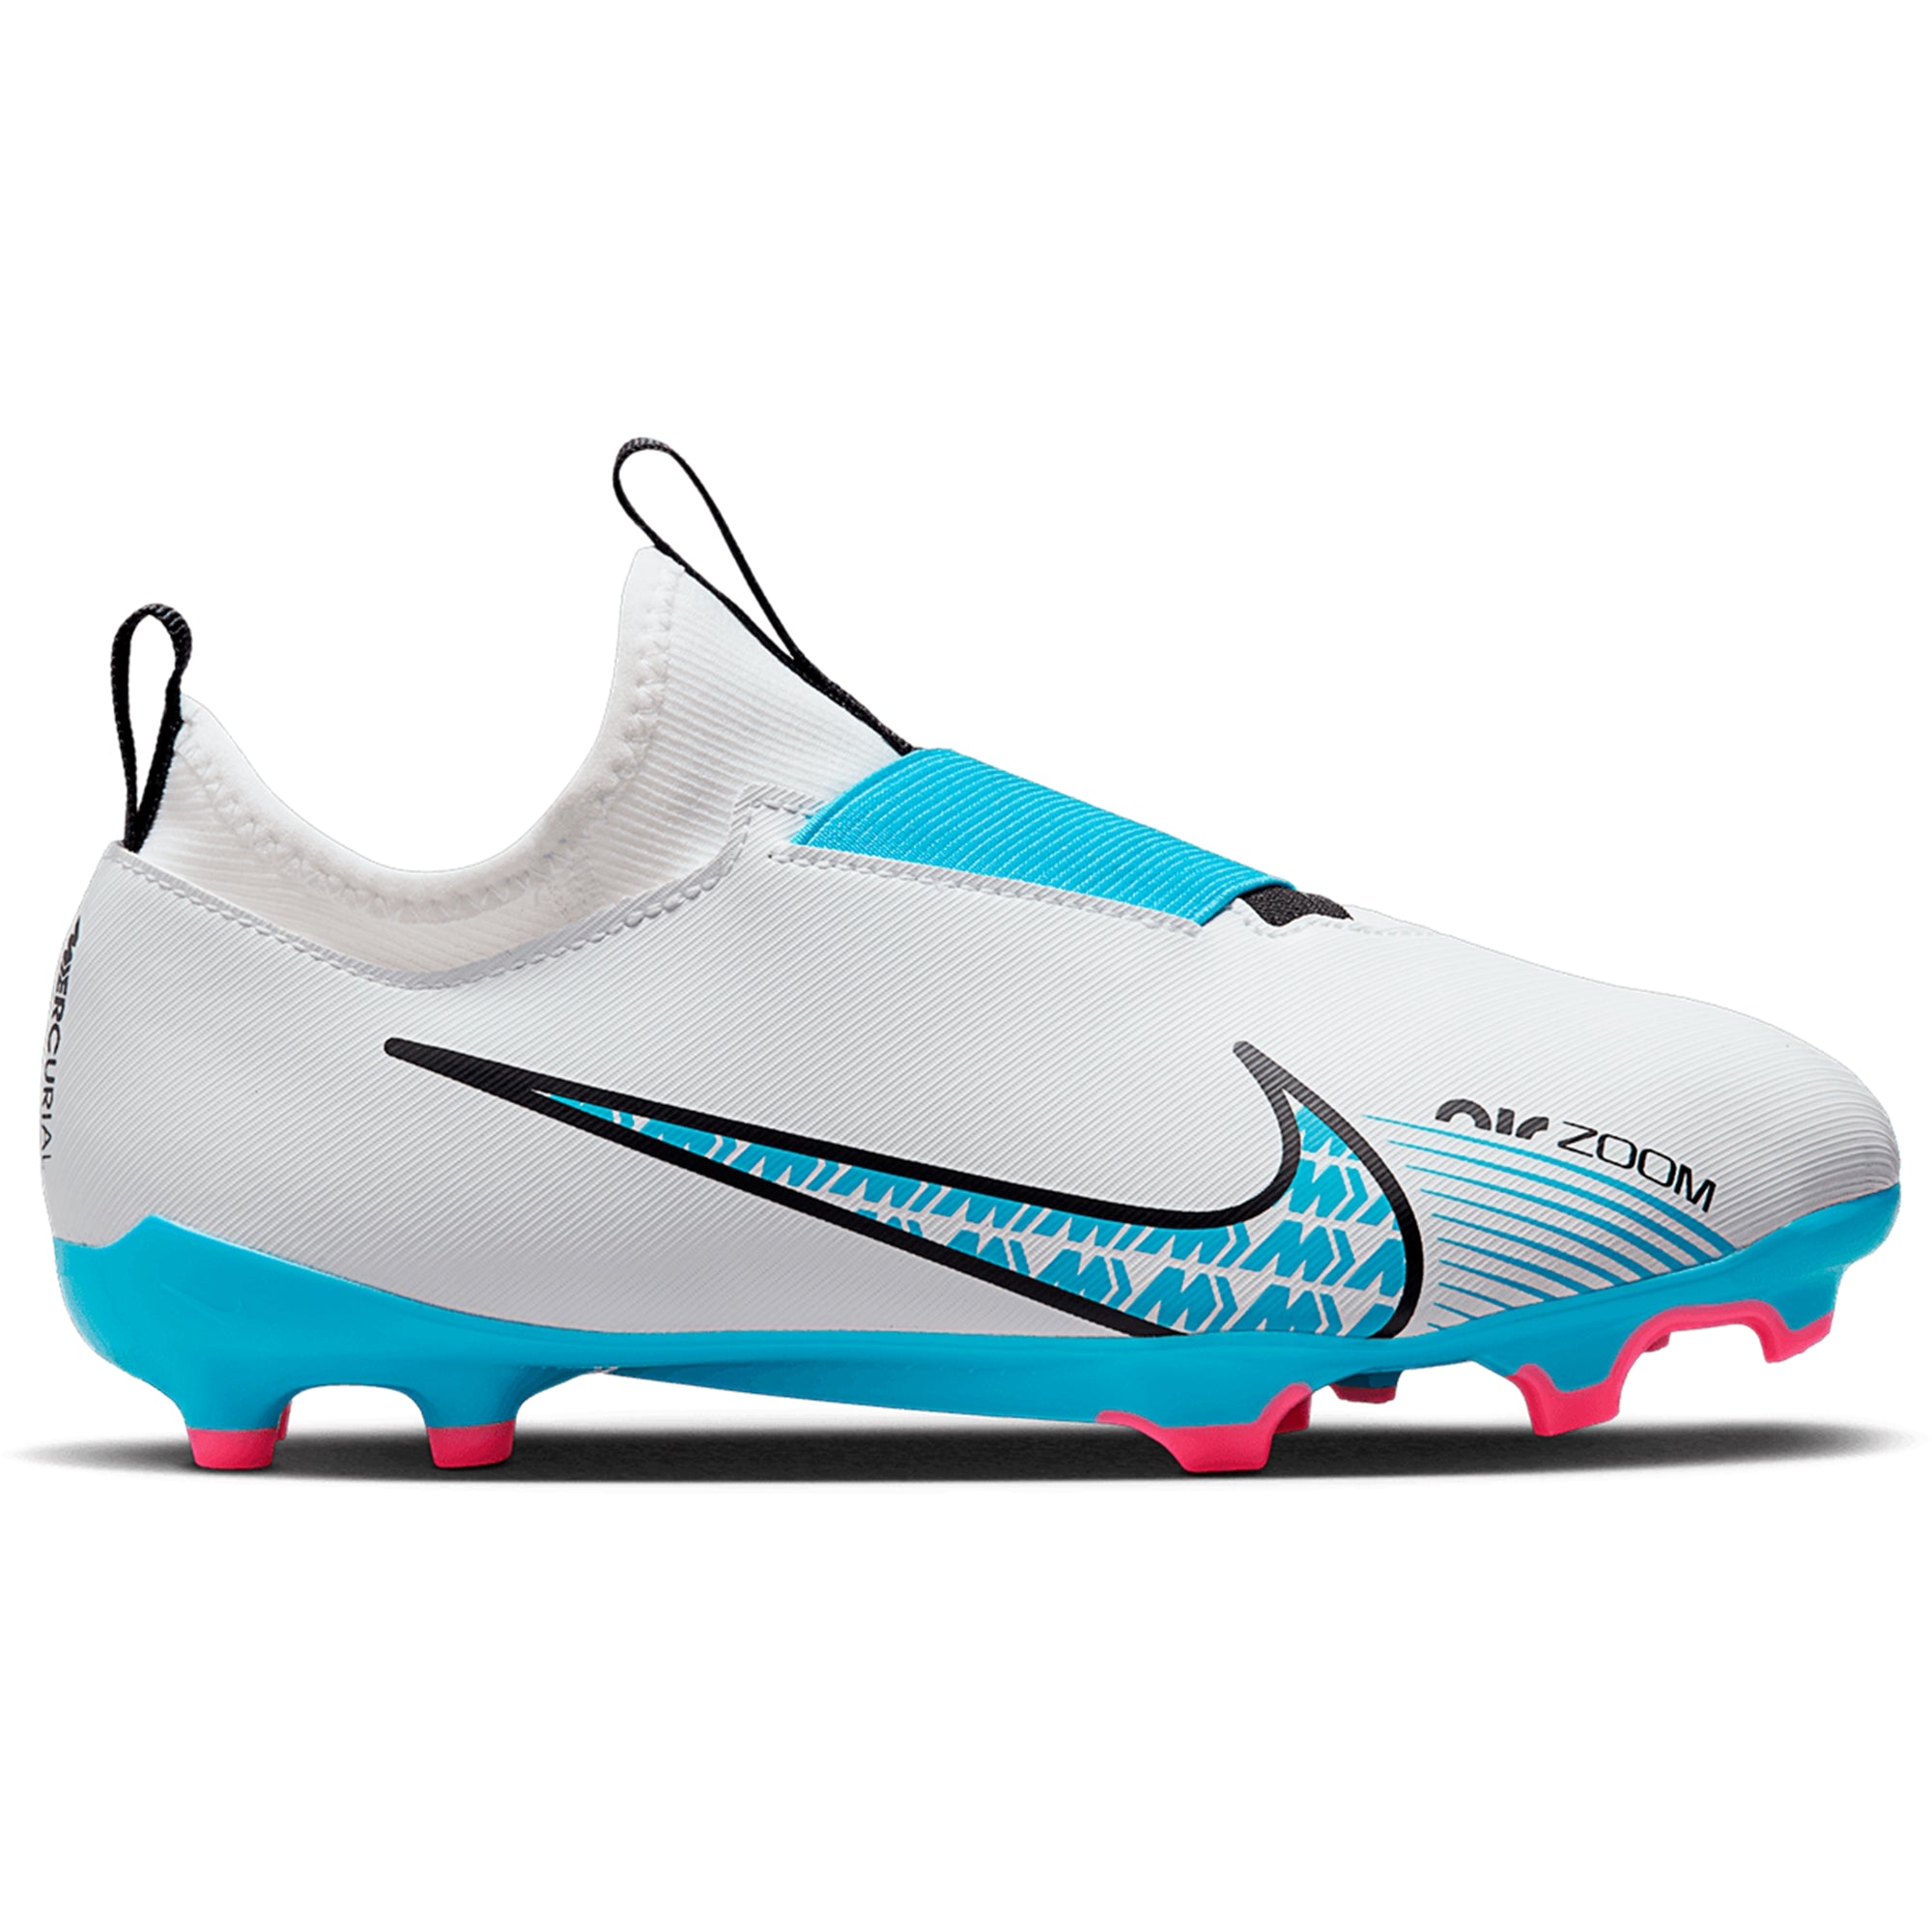 Off-White x Nike Is Now a Football Cleat